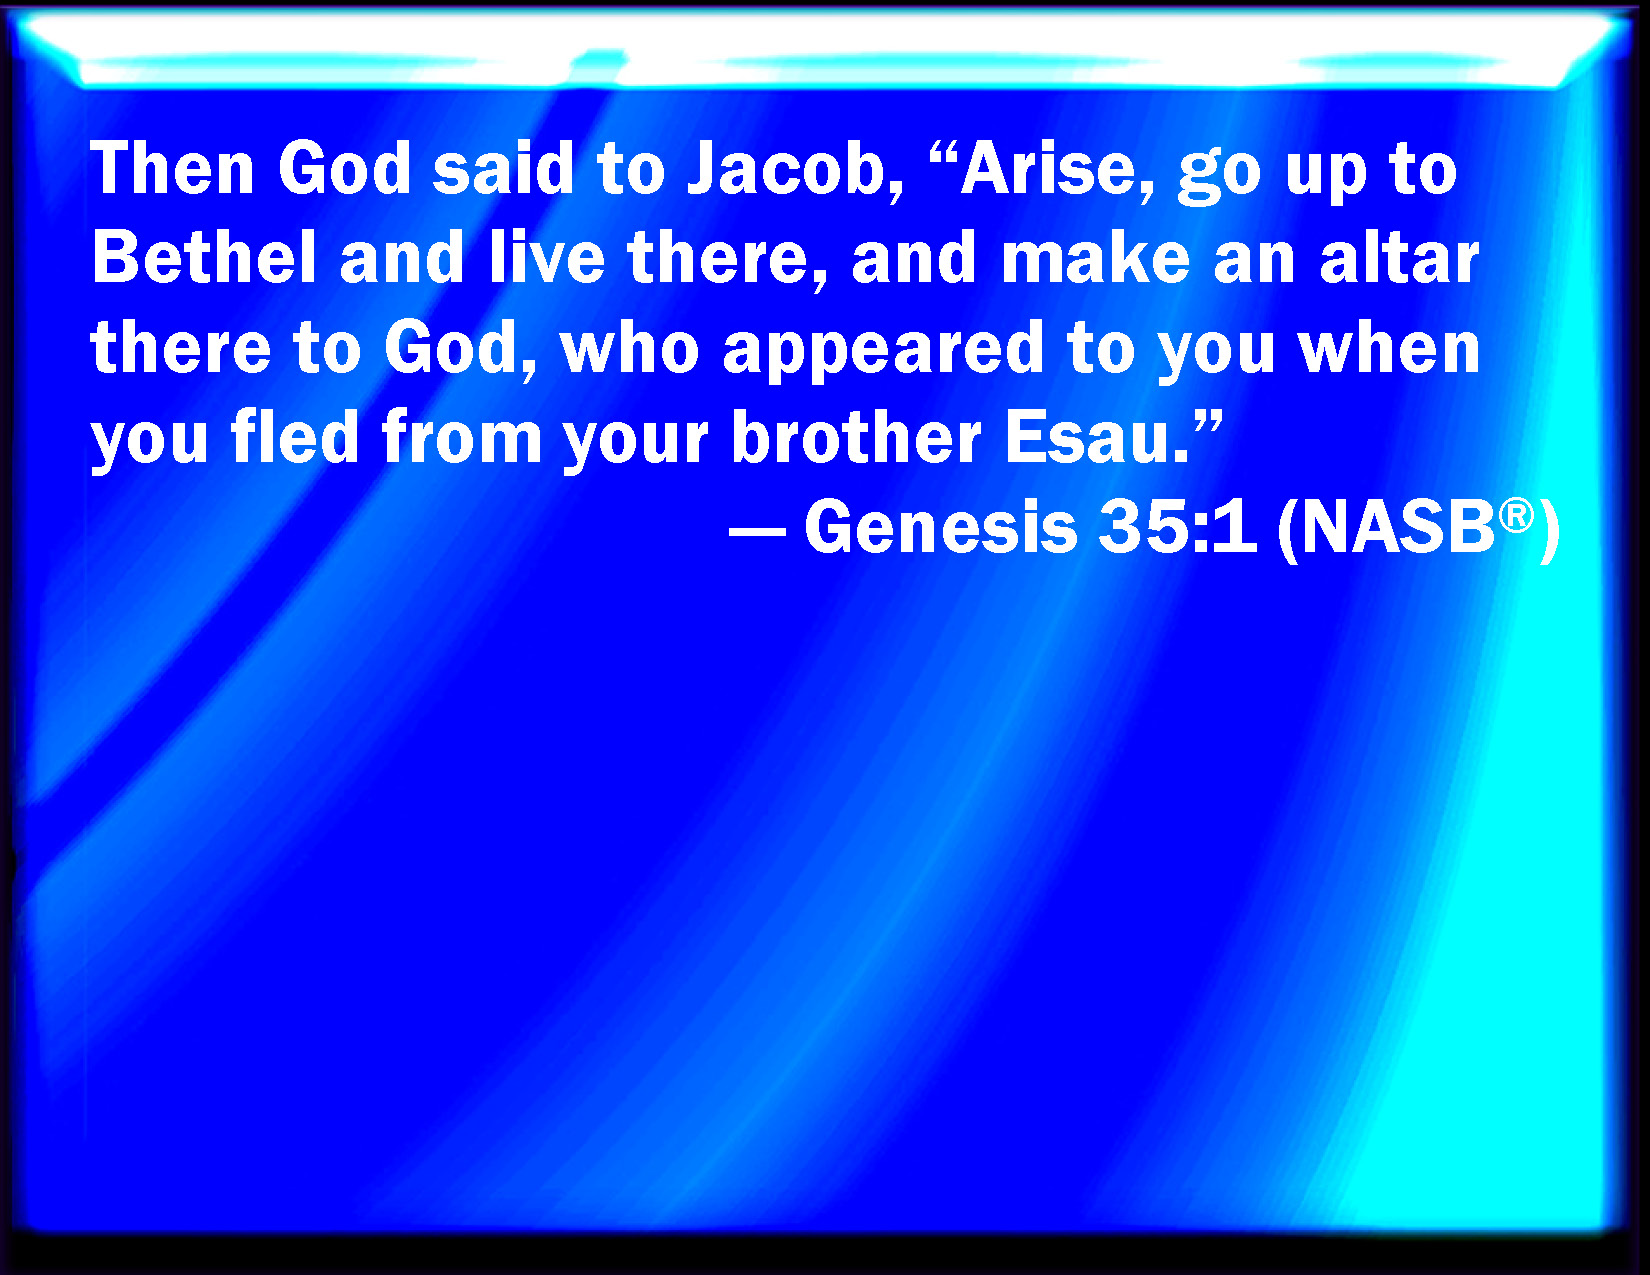 Genesis 35:1 And God said to Jacob, Arise, go up to Bethel, and dwell